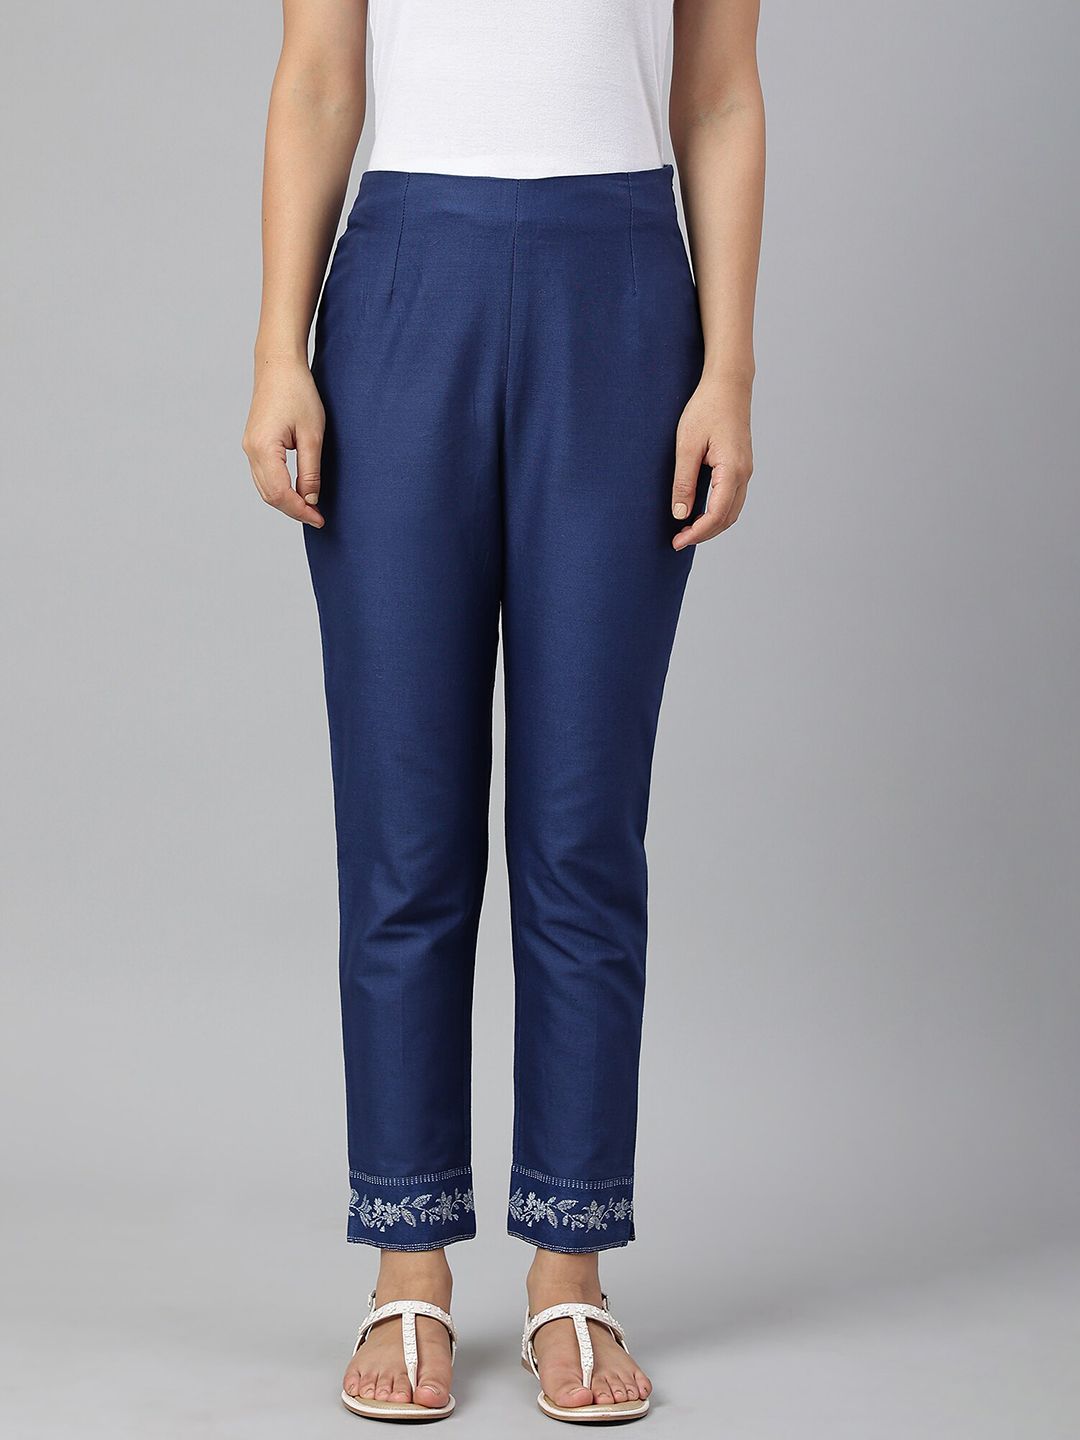 W Women Blue Slim Fit Trousers Price in India